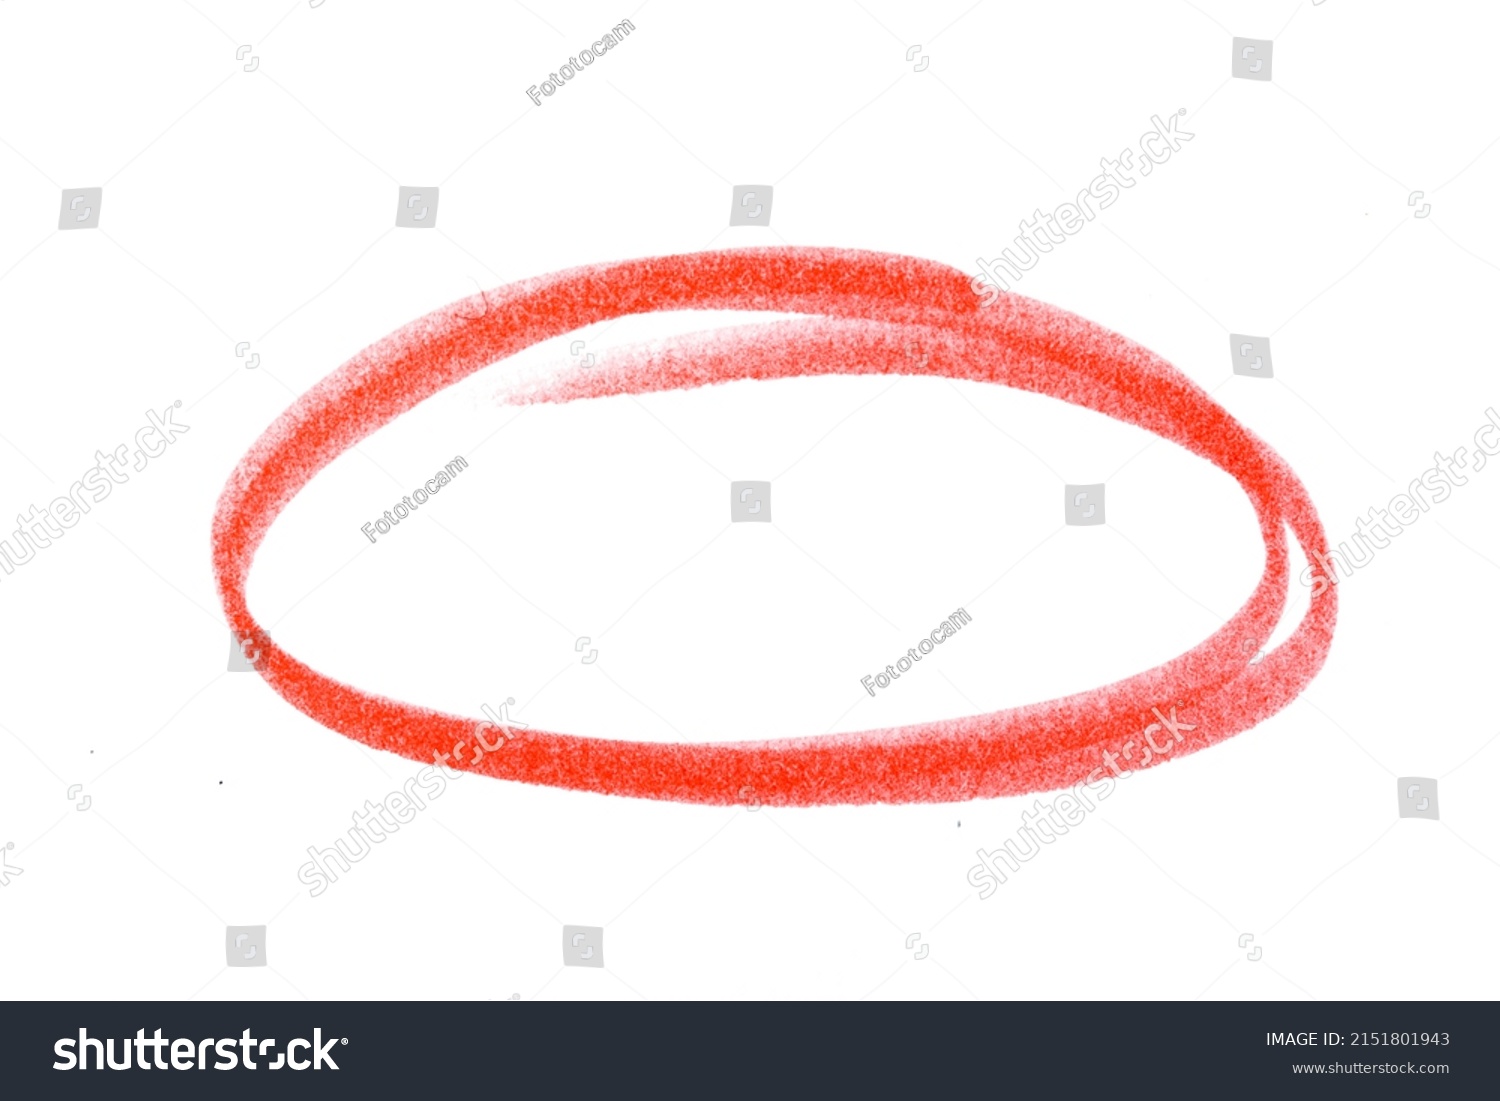 red highlighter circle on white background #2151801943